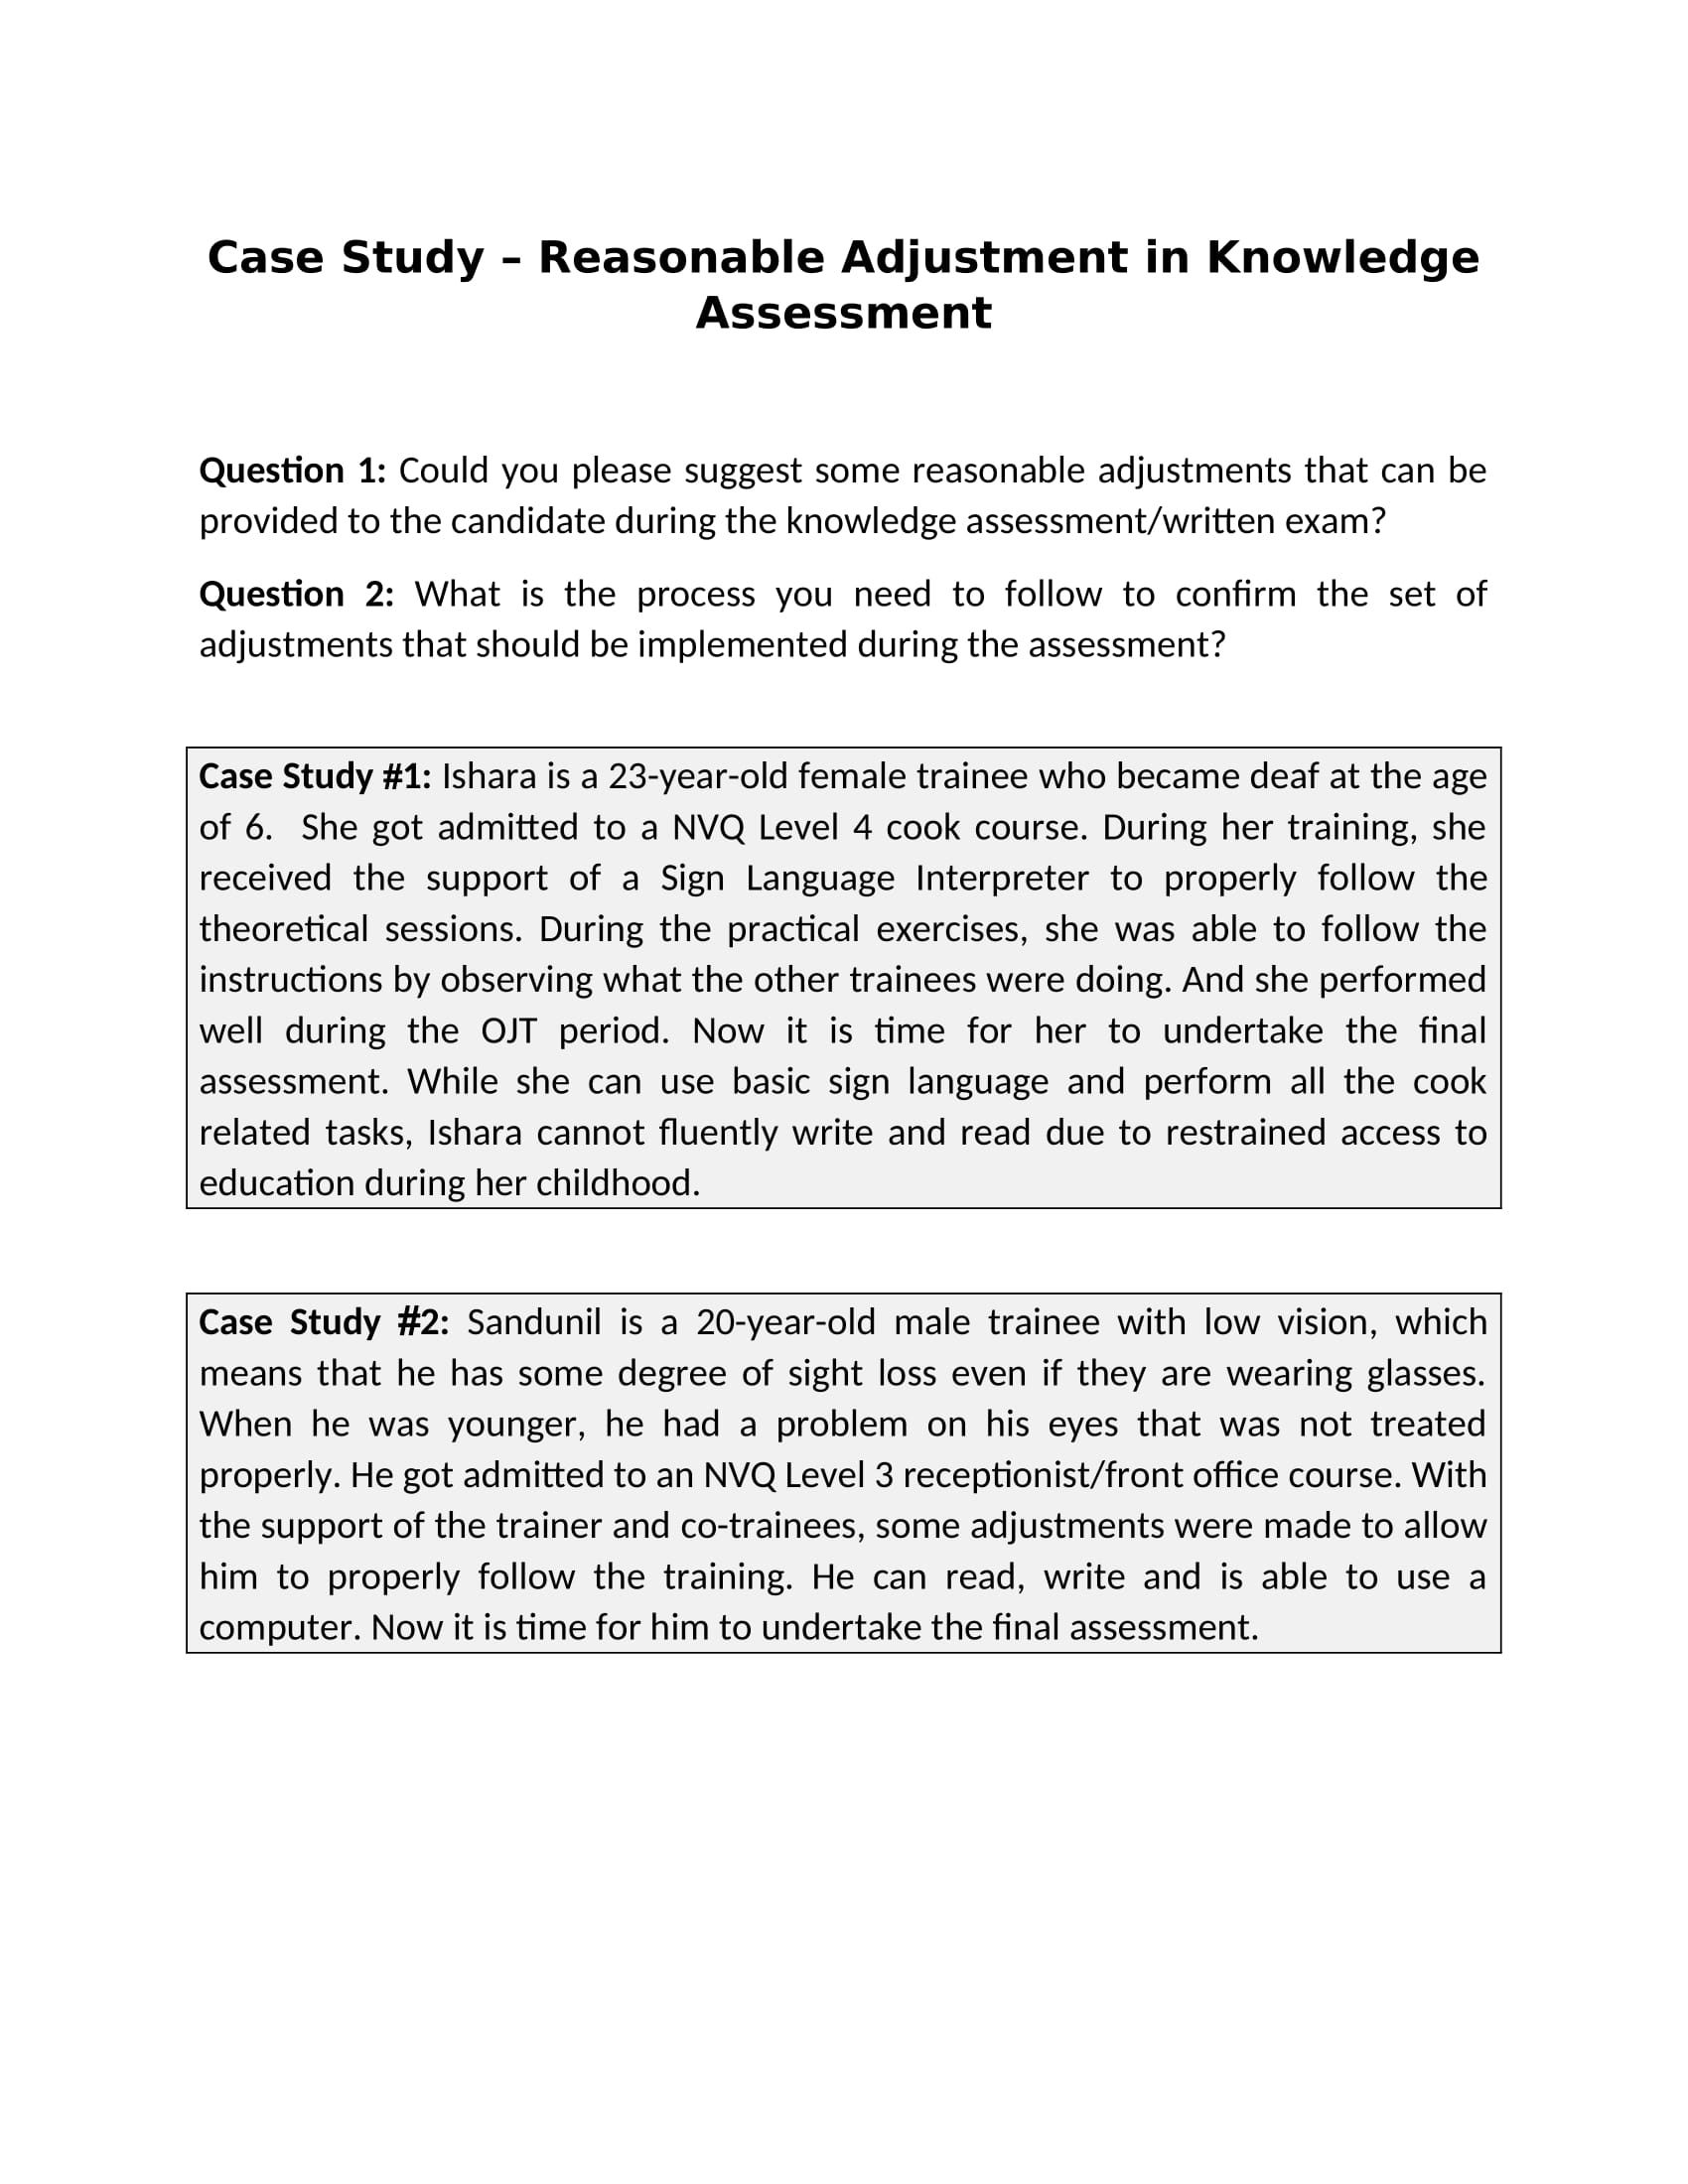 Topic 4 Reasonable Adjustment in knowledge assessment-1.jpg